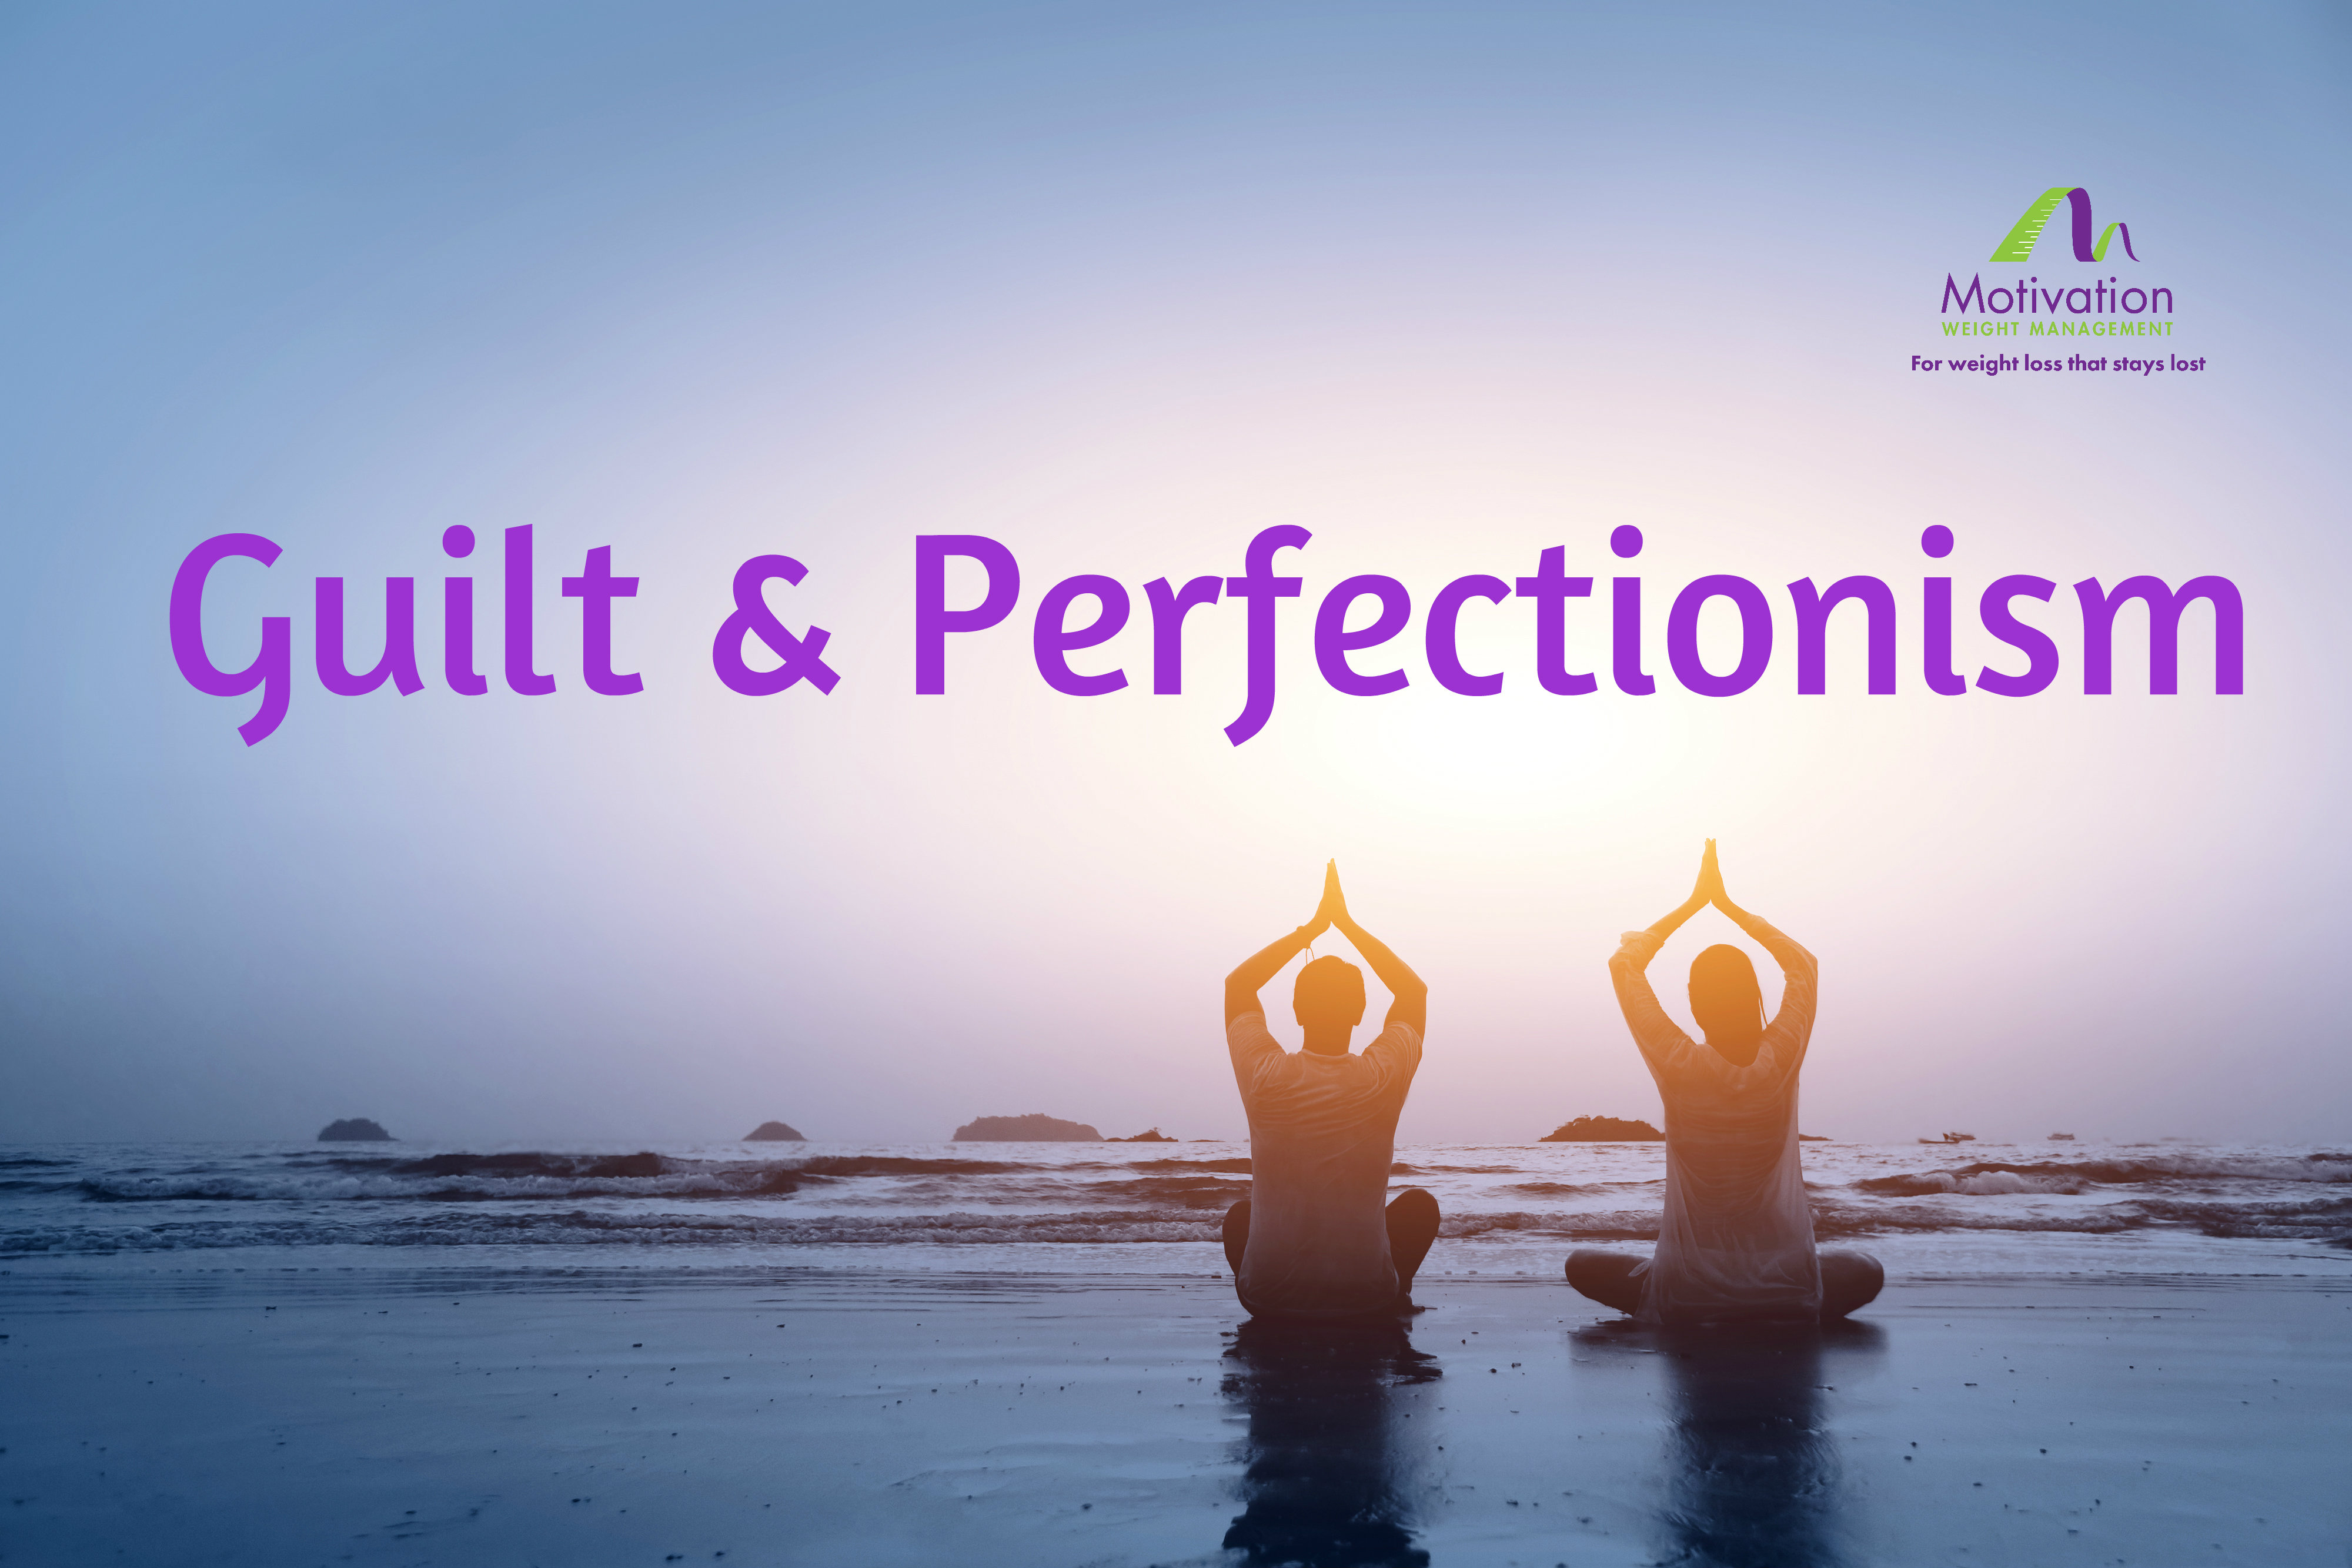 Day 14 Guilt & Perfectionism